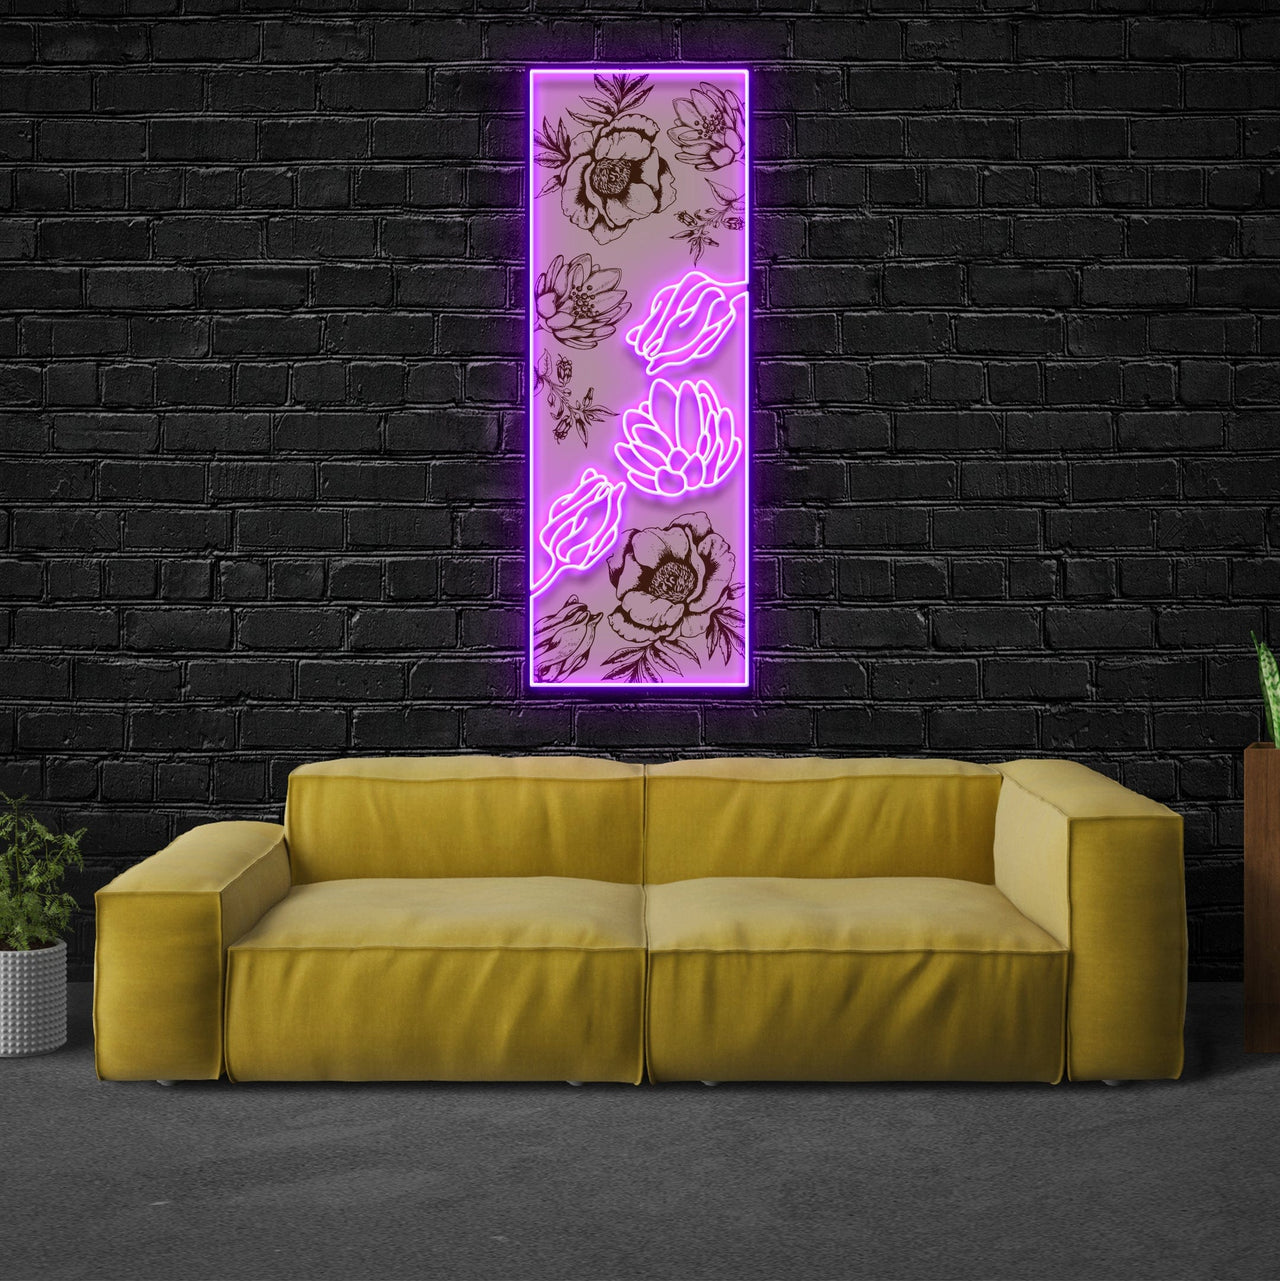 "Flower Wall V2" Neon x Acrylic Artwork by Neon Icons